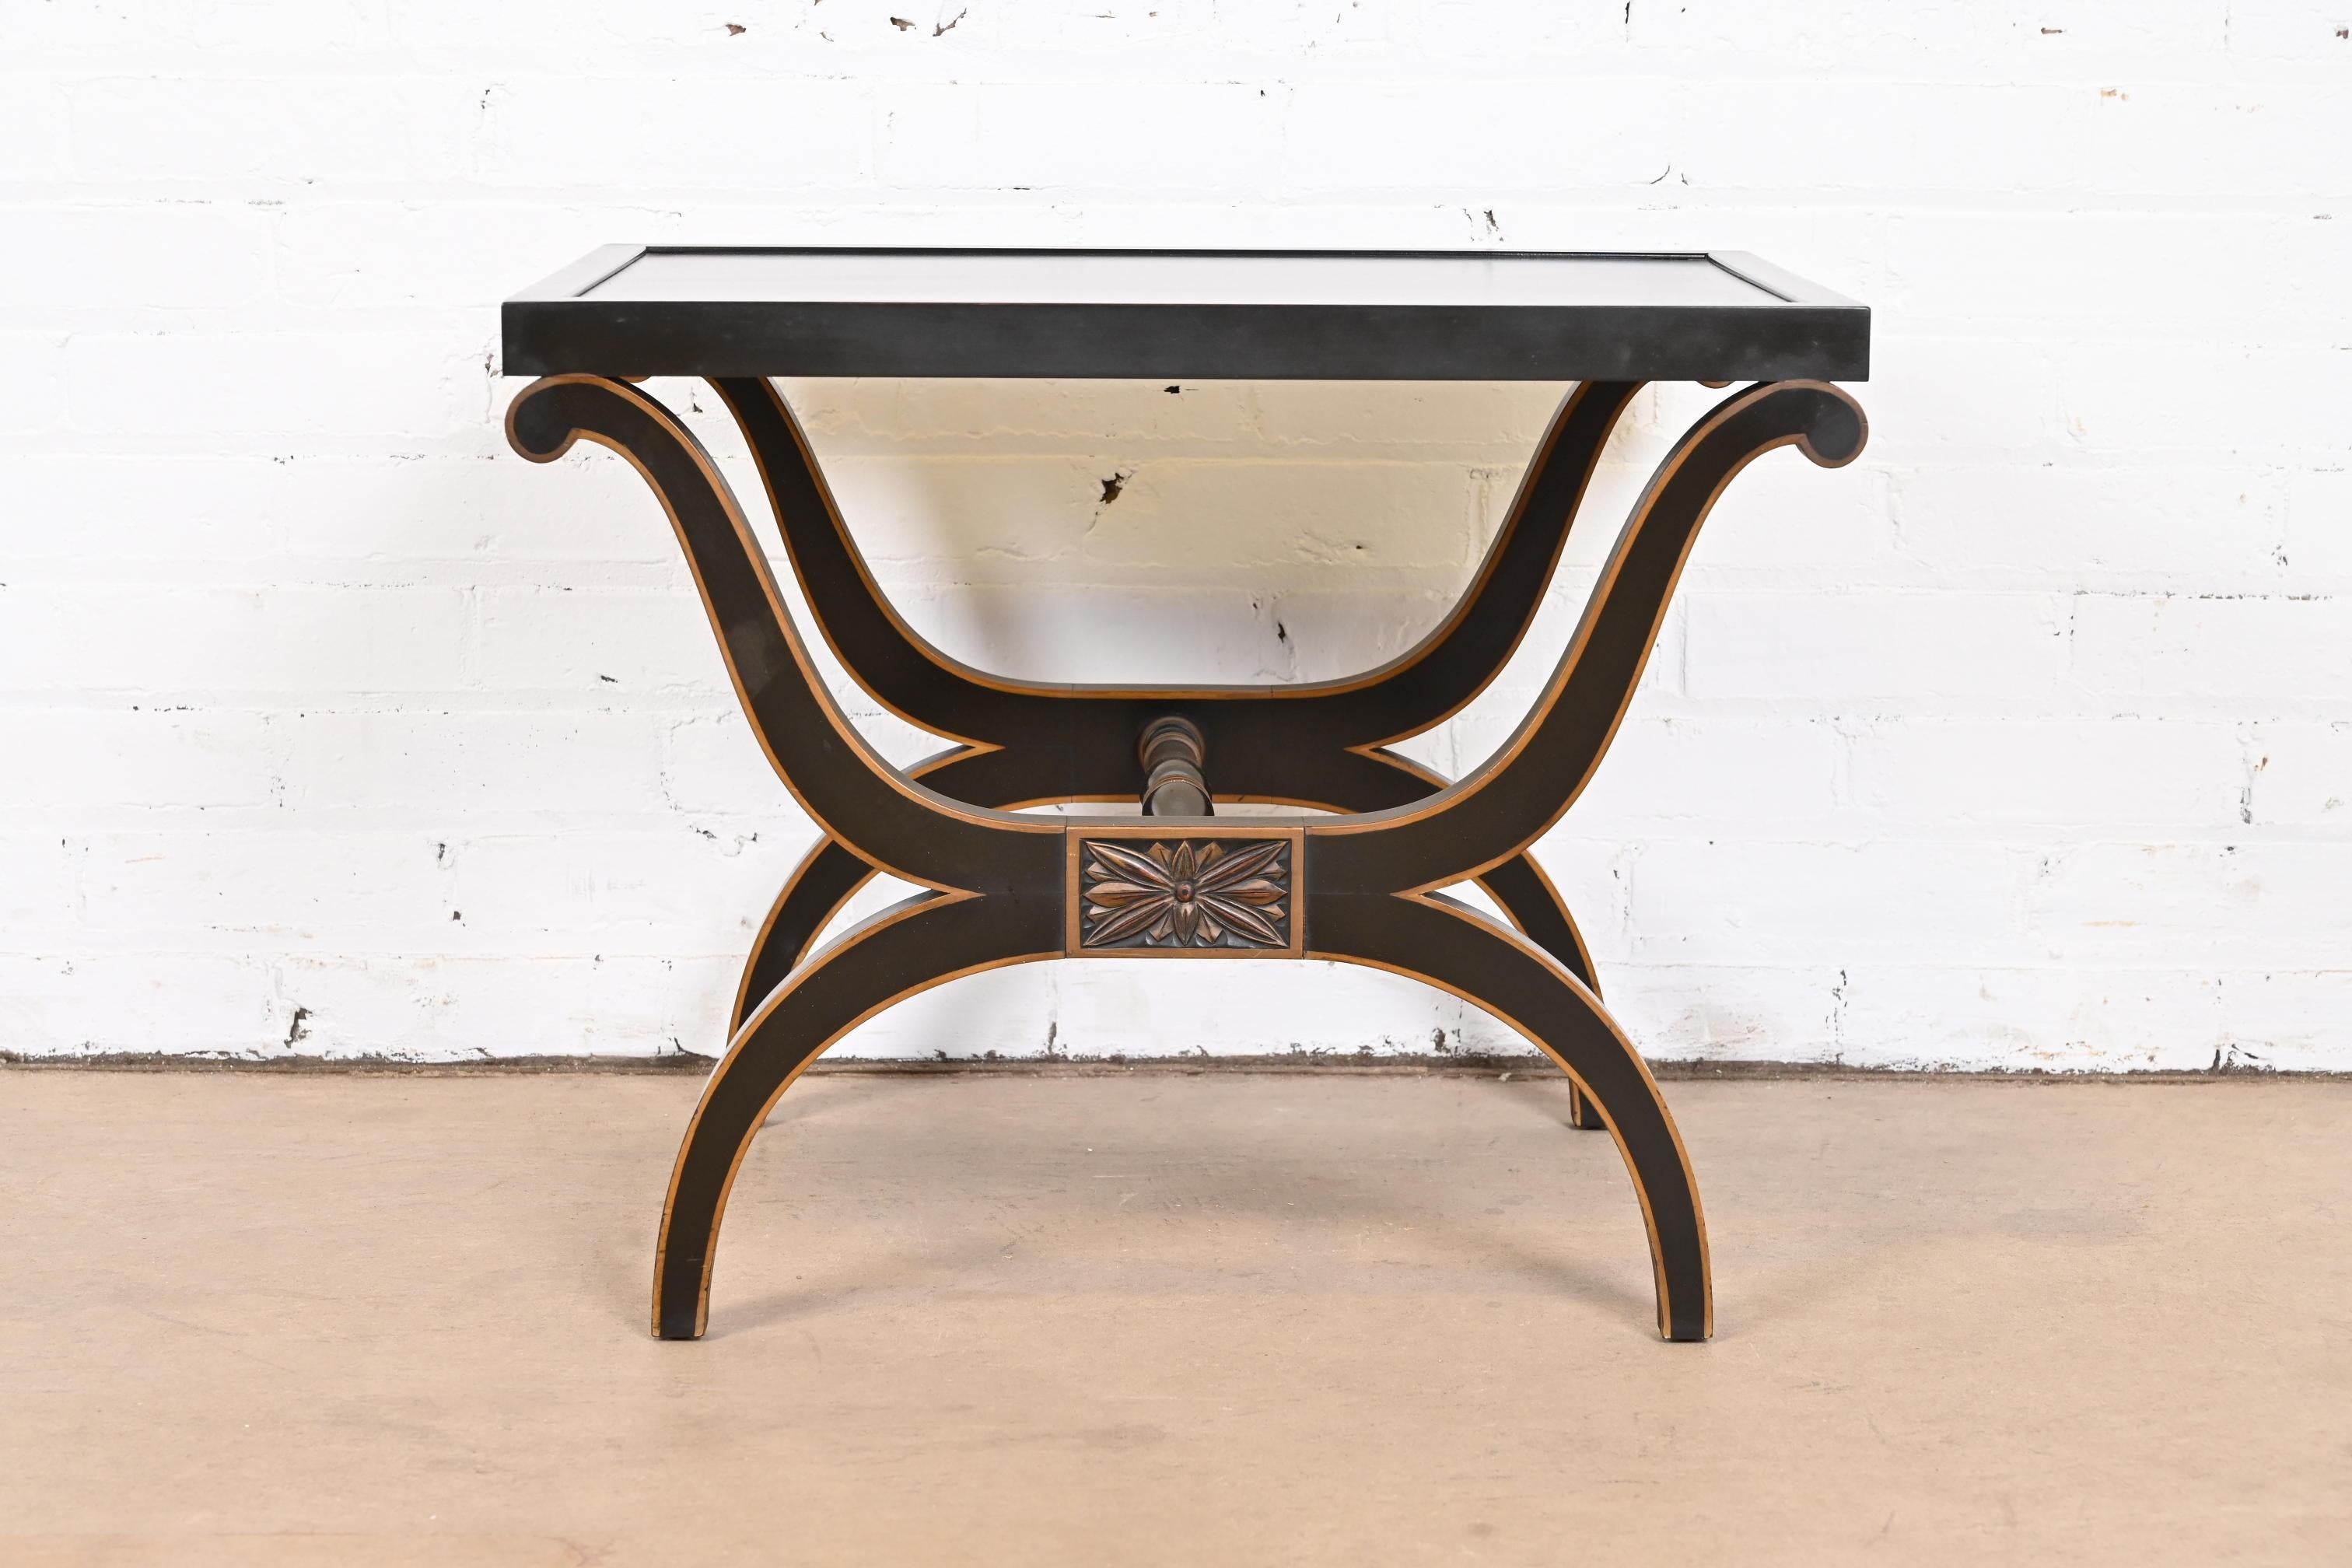 A gorgeous Neoclassical or Empire style Curule ebonized and parcel gilt tea table or occasional side table

By Kittinger

USA, Mid 20th Century

Measures: 22.5